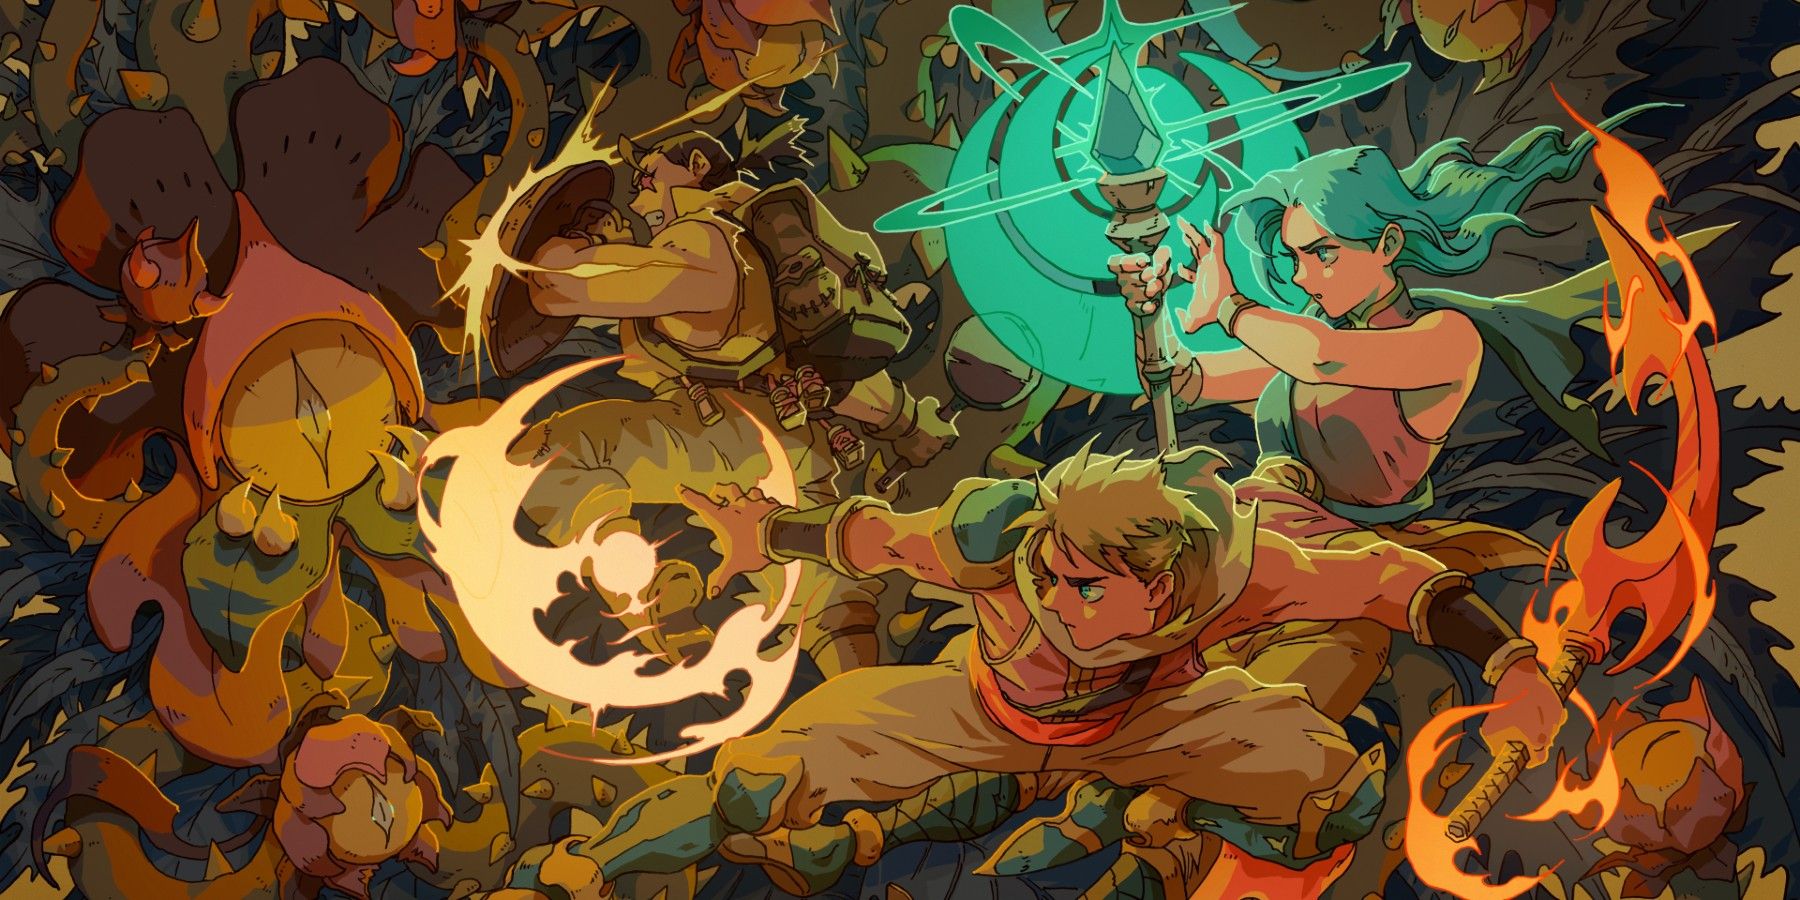 Sea of Stars' protagonists fighting using a glowing blue staff and fire to attack giant monsters.